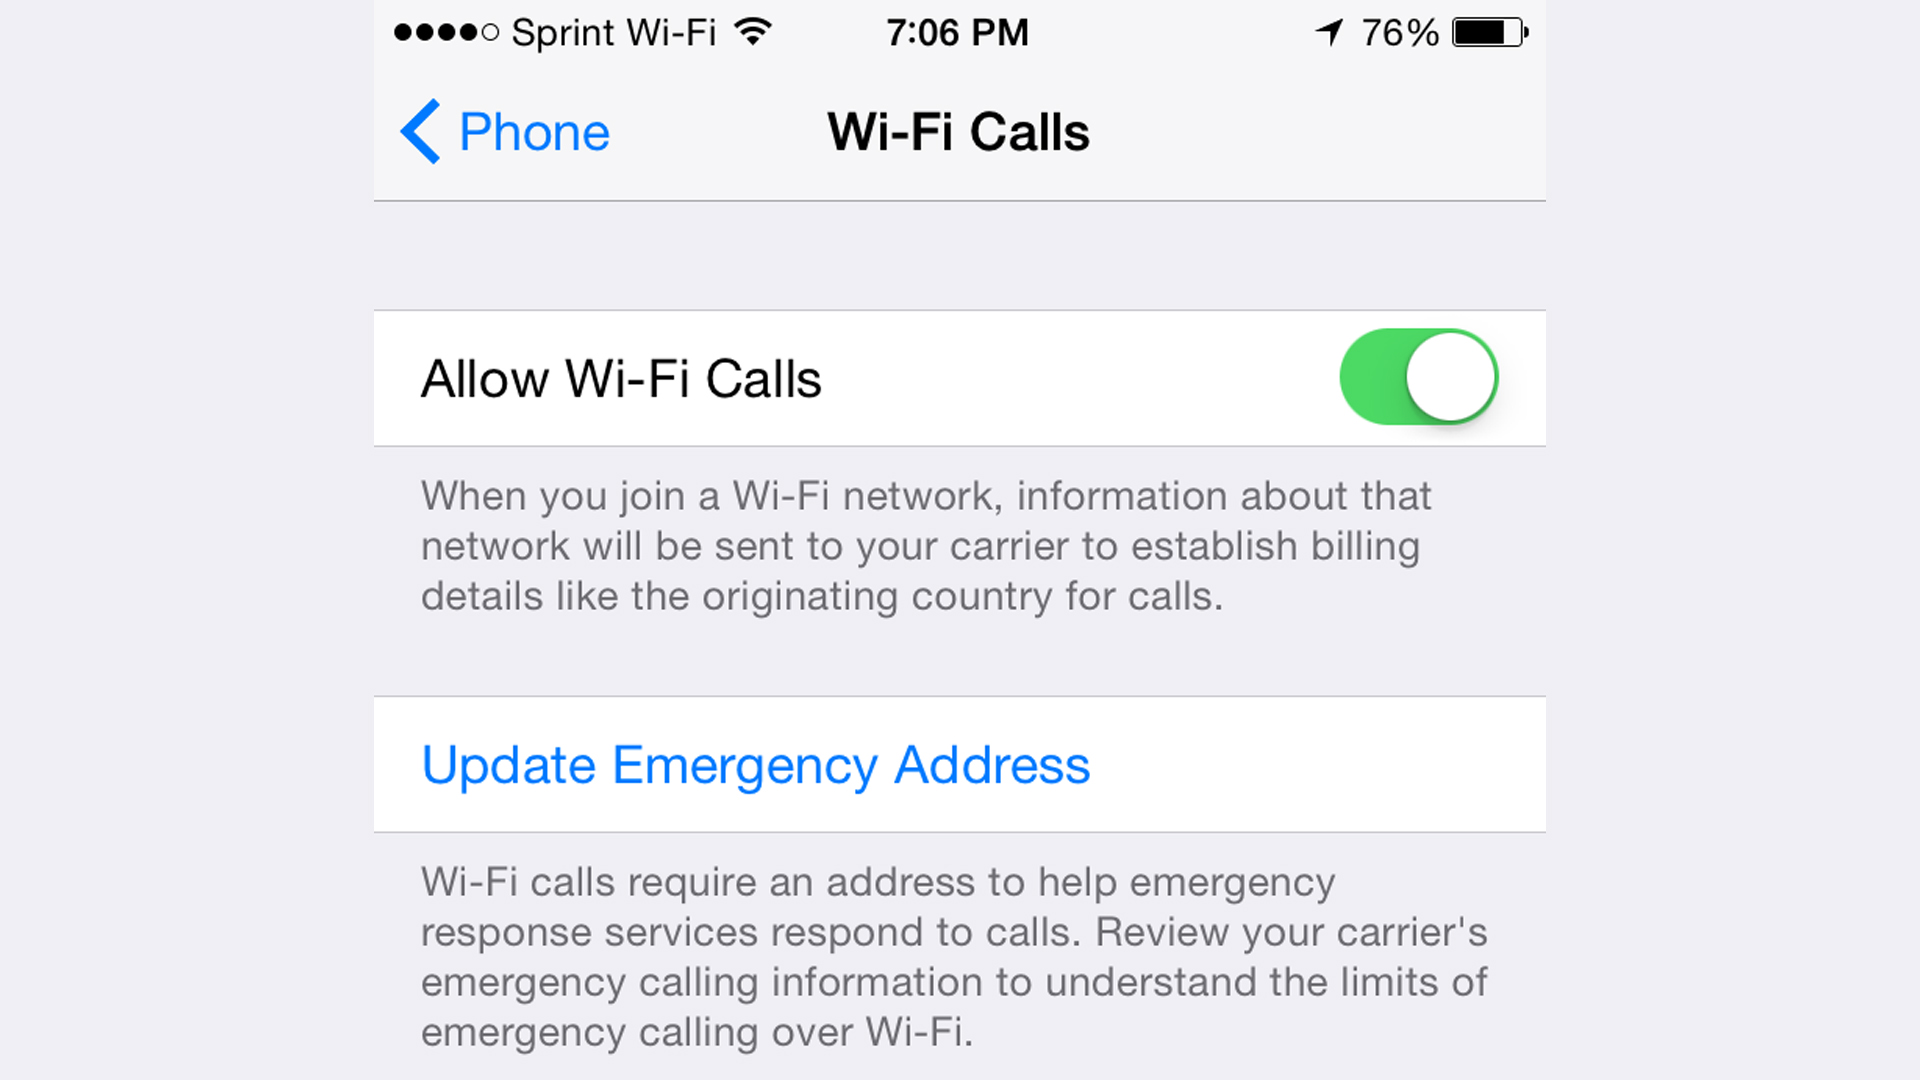 UPDATED: Sprint Enables Wi-Fi Calling for iOS device with iOS 8.3!